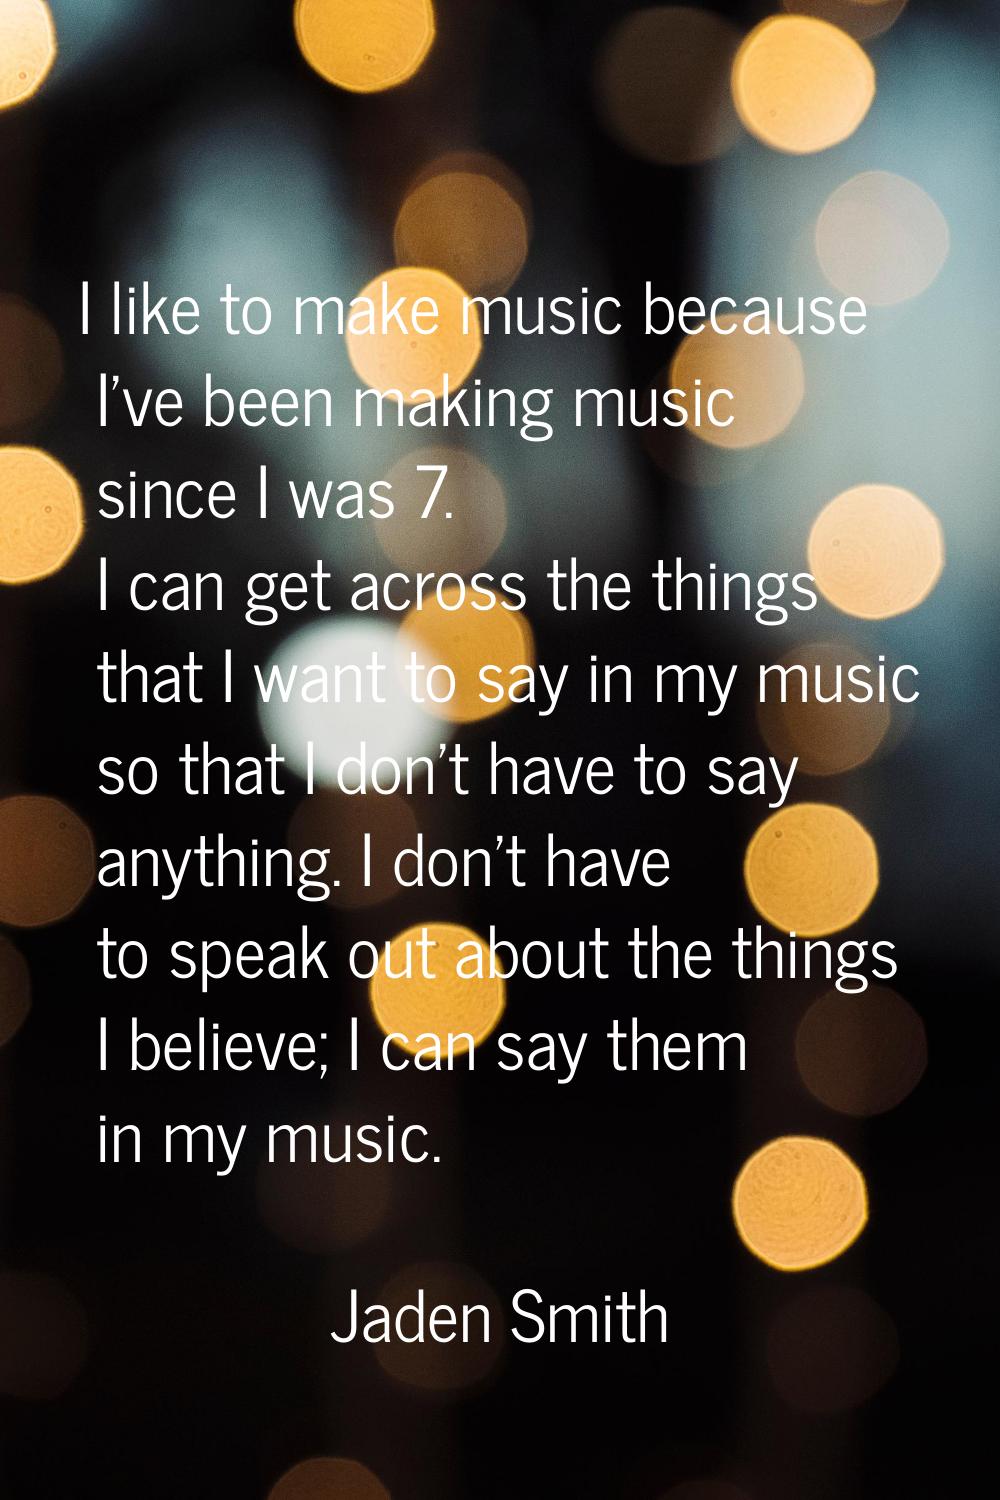 I like to make music because I've been making music since I was 7. I can get across the things that